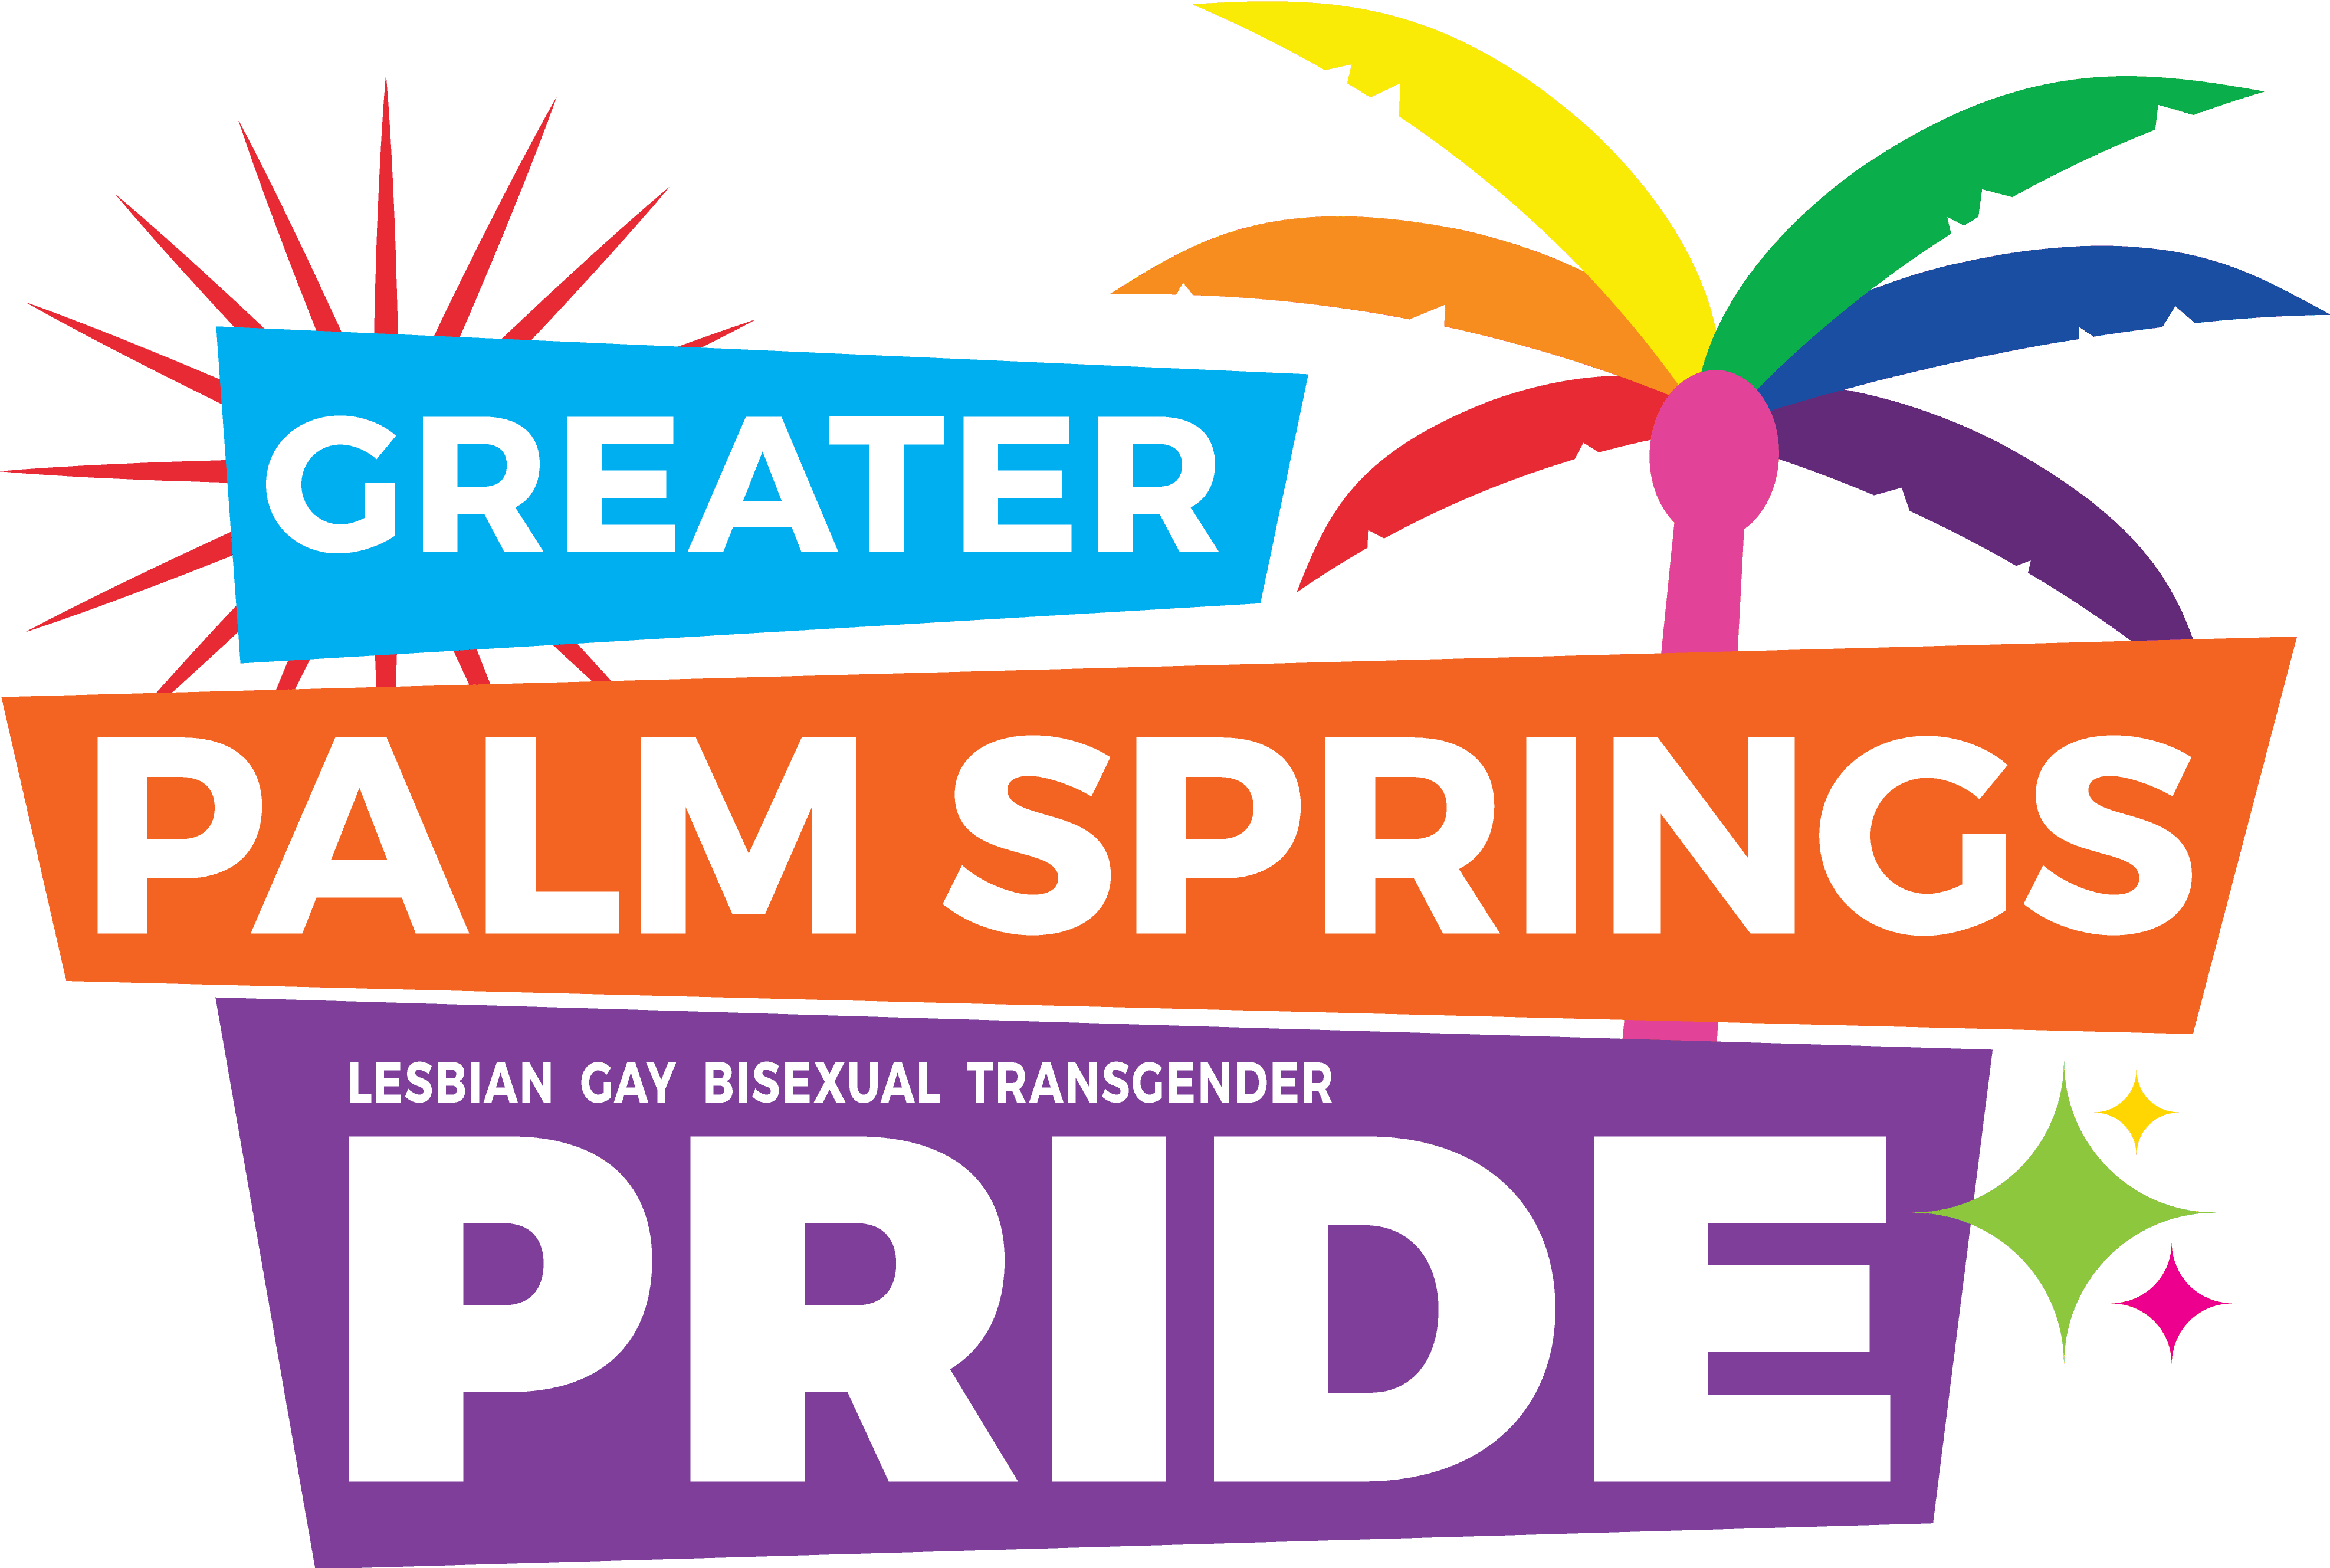 Come Together In Community To Walk In The Pride Parade - Palm Springs Pride Parade 2018 (3950x2658)